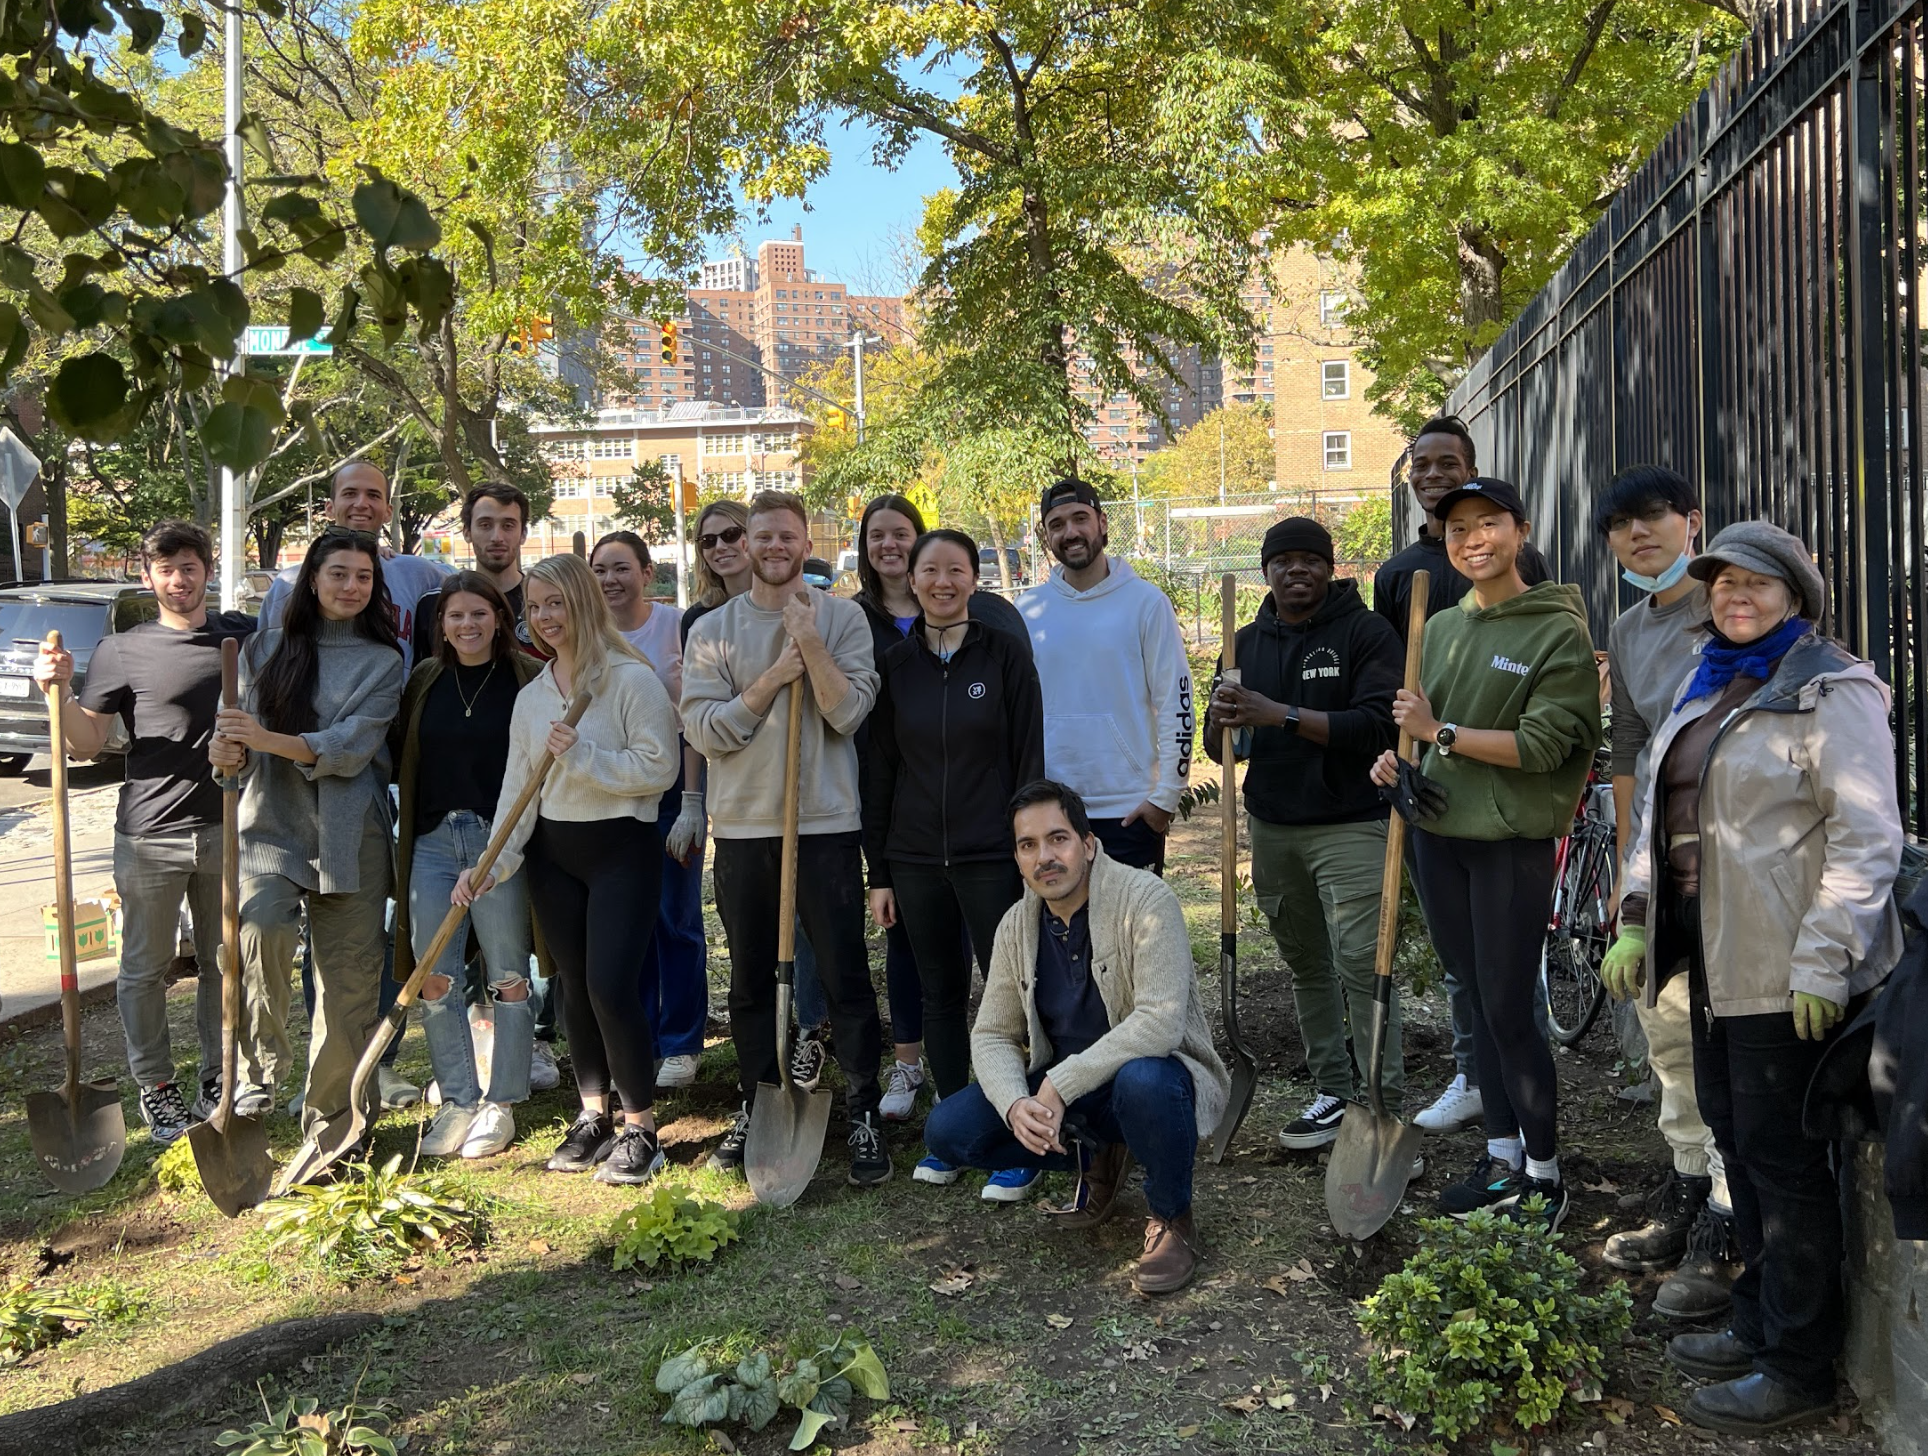 Group photo of Yext team members volunteering at a gardening event, holding shovels.